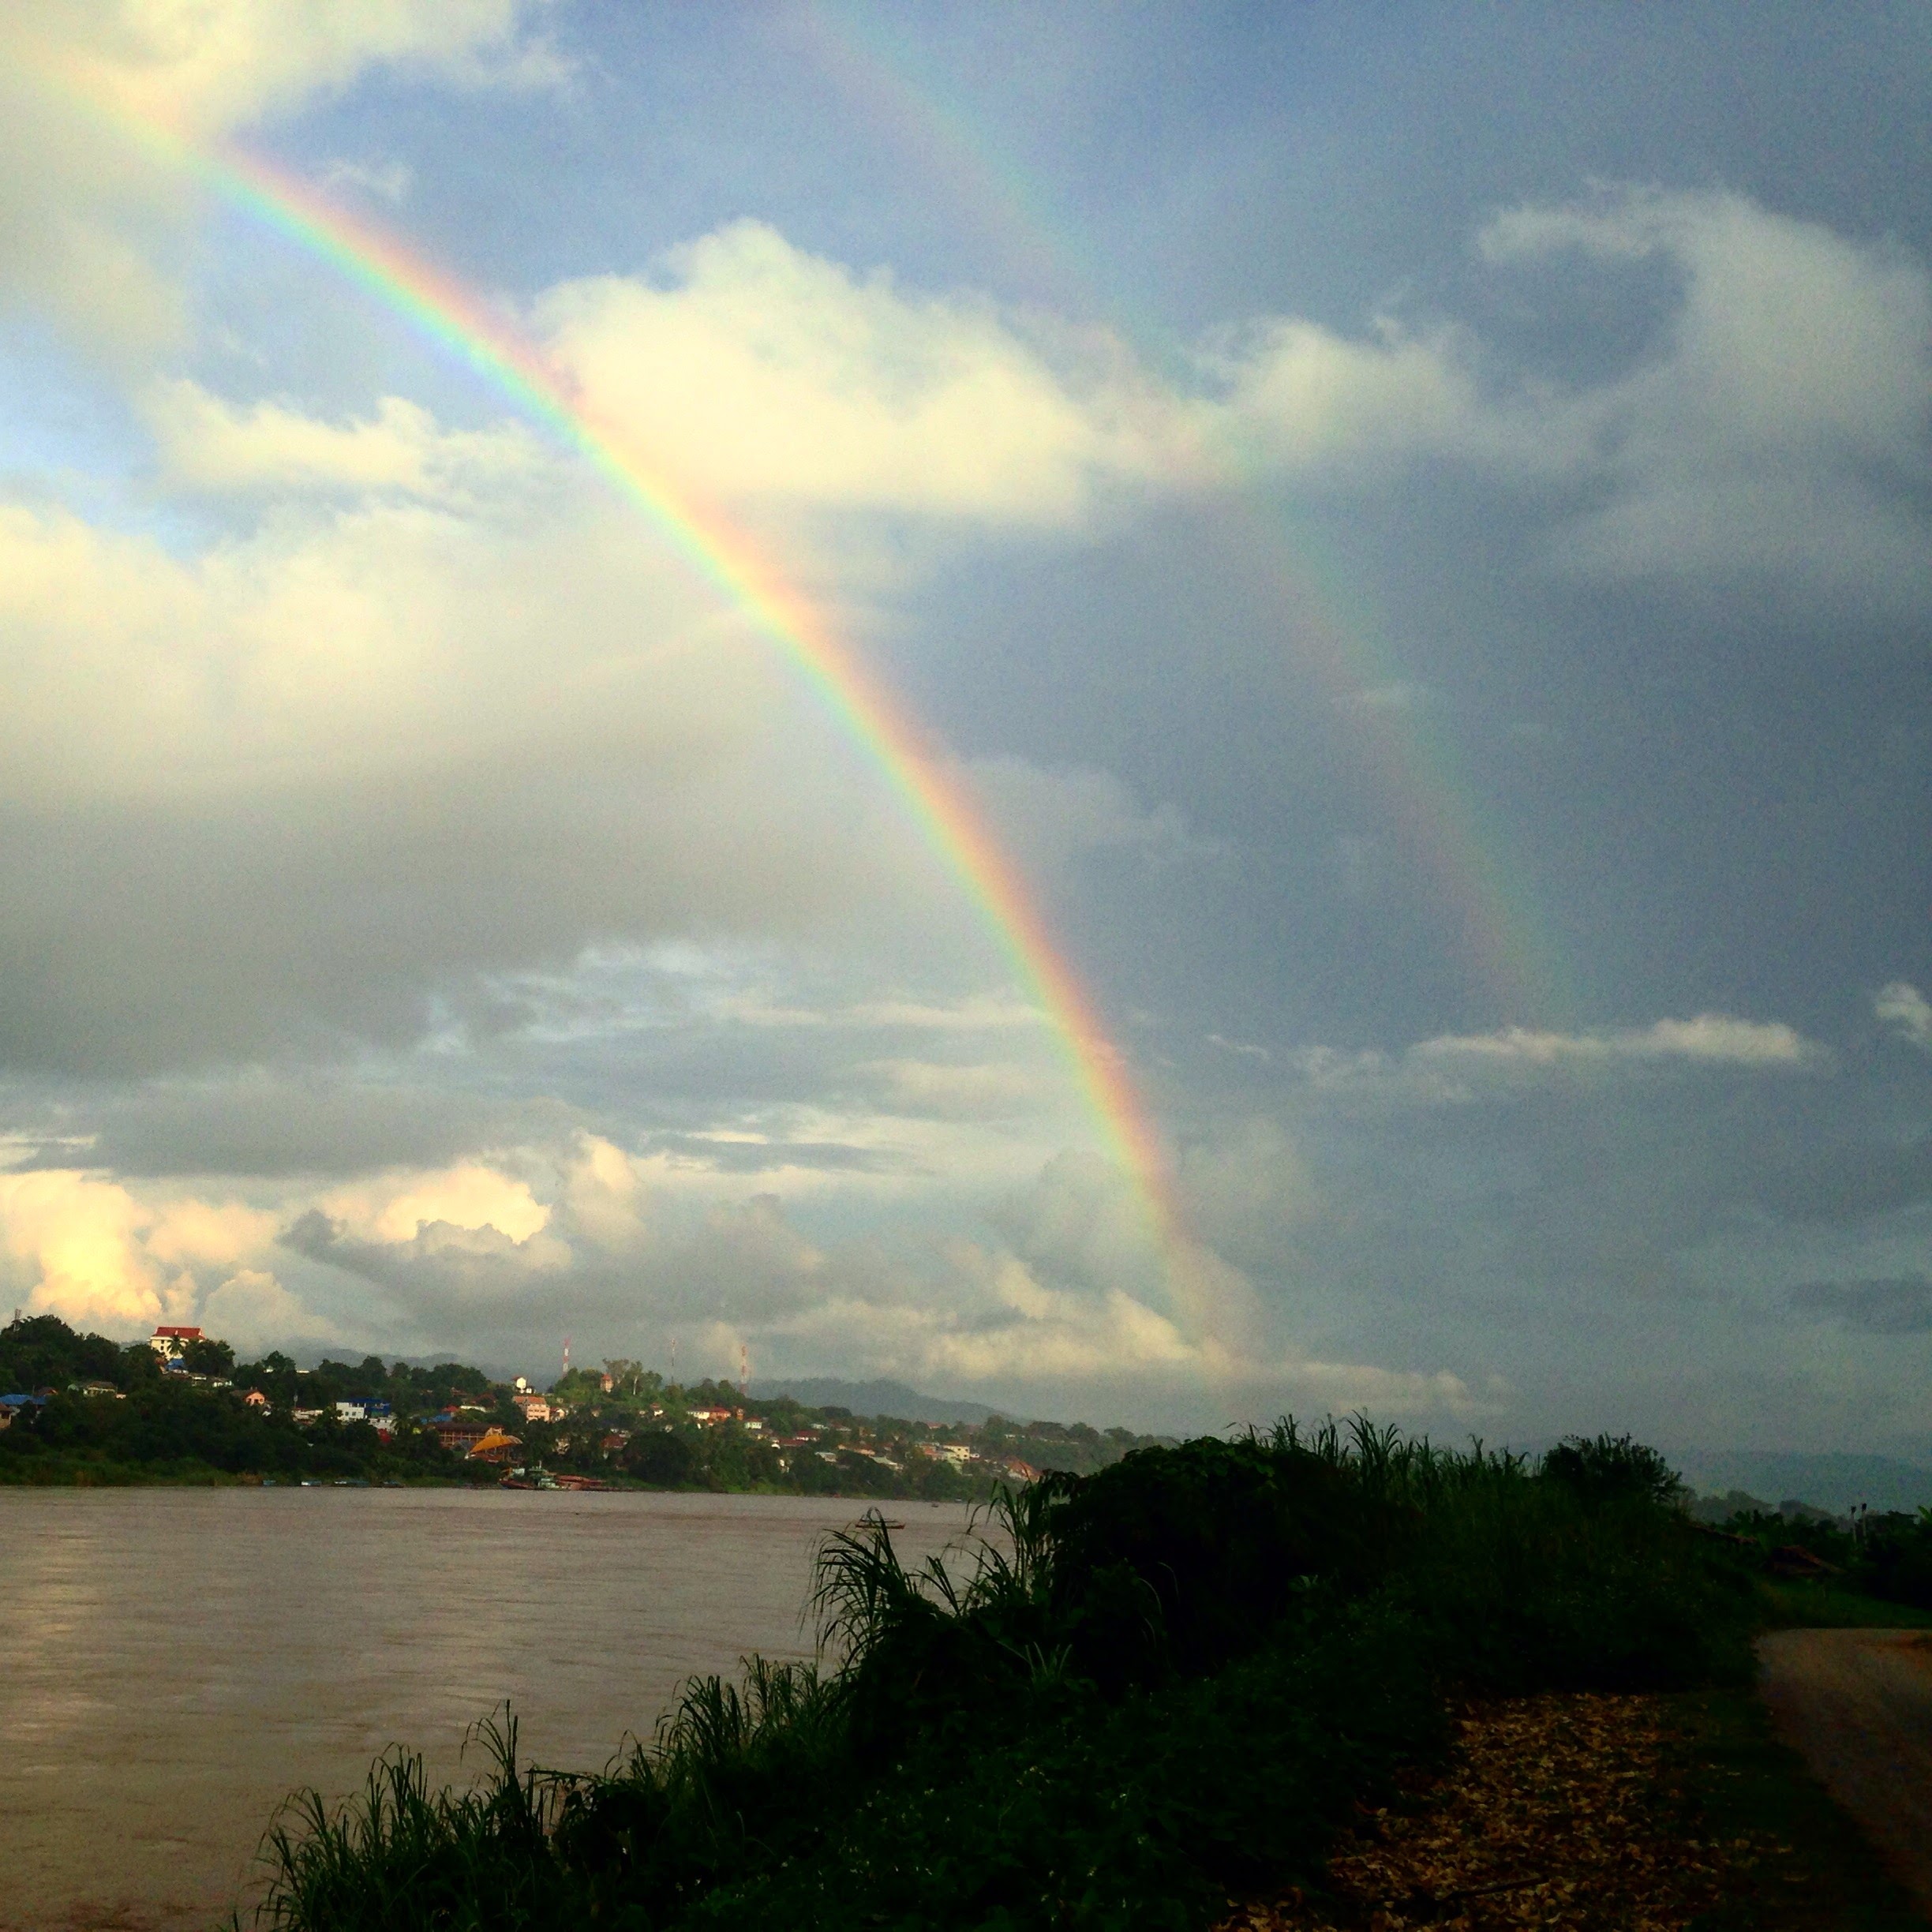  A double rainbow over the Mekong River, with one end in Thailand and the other in Laos. 